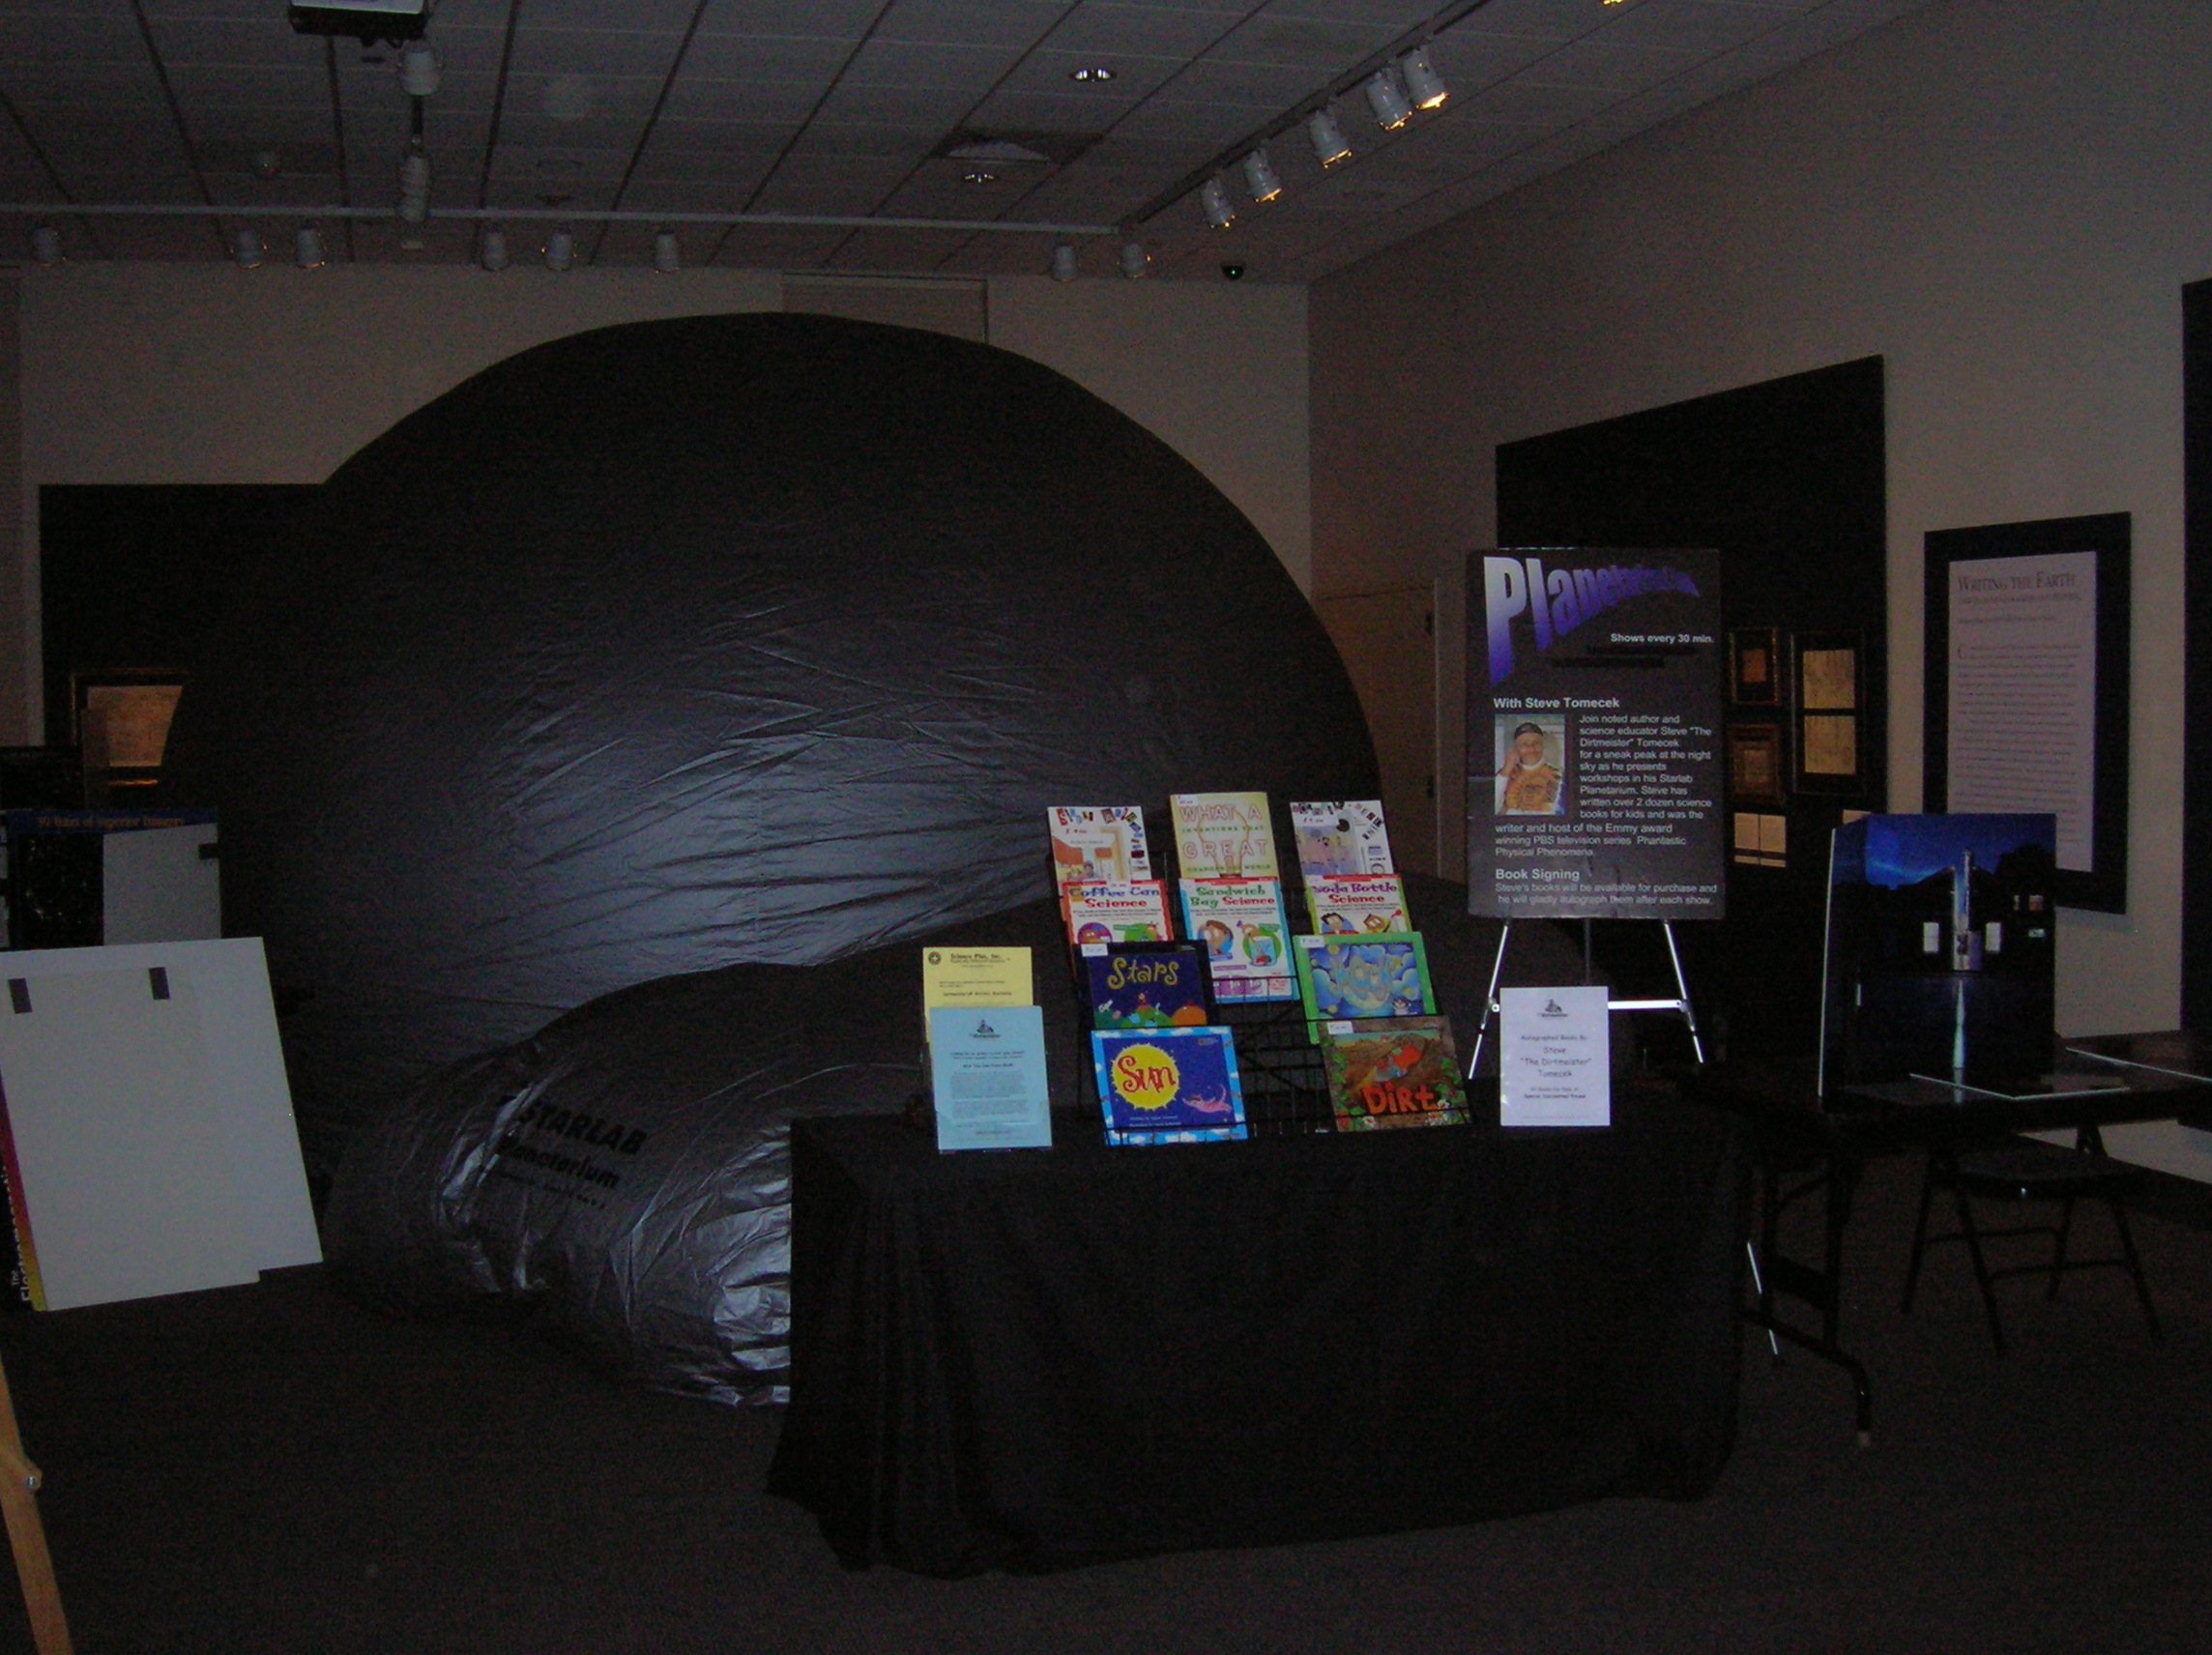 Doing Starlab at the Bruce Museum in Greenwich, CT.